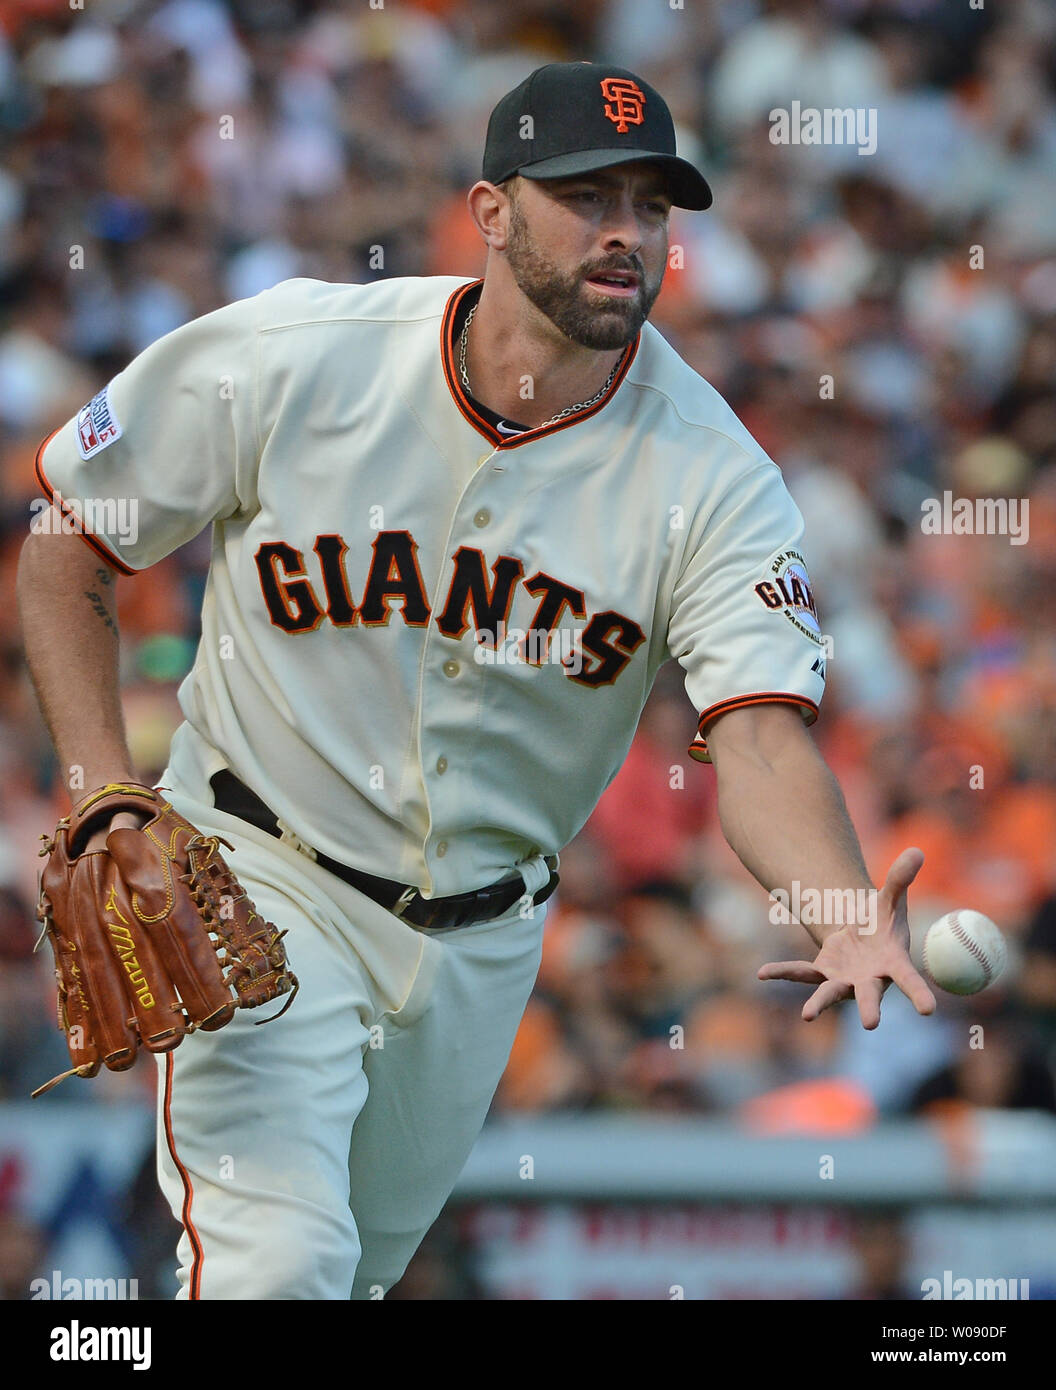 San Francisco Giants reliever Jeremy Affeldt  lobs the ball to first to get Washington Nationals Jordan Zimmerman in the ninth inning of game 3 of the National League Division Series at AT&T Park in San Francisco on October 6, 2014. UPI/Terry Schmitt Stock Photo